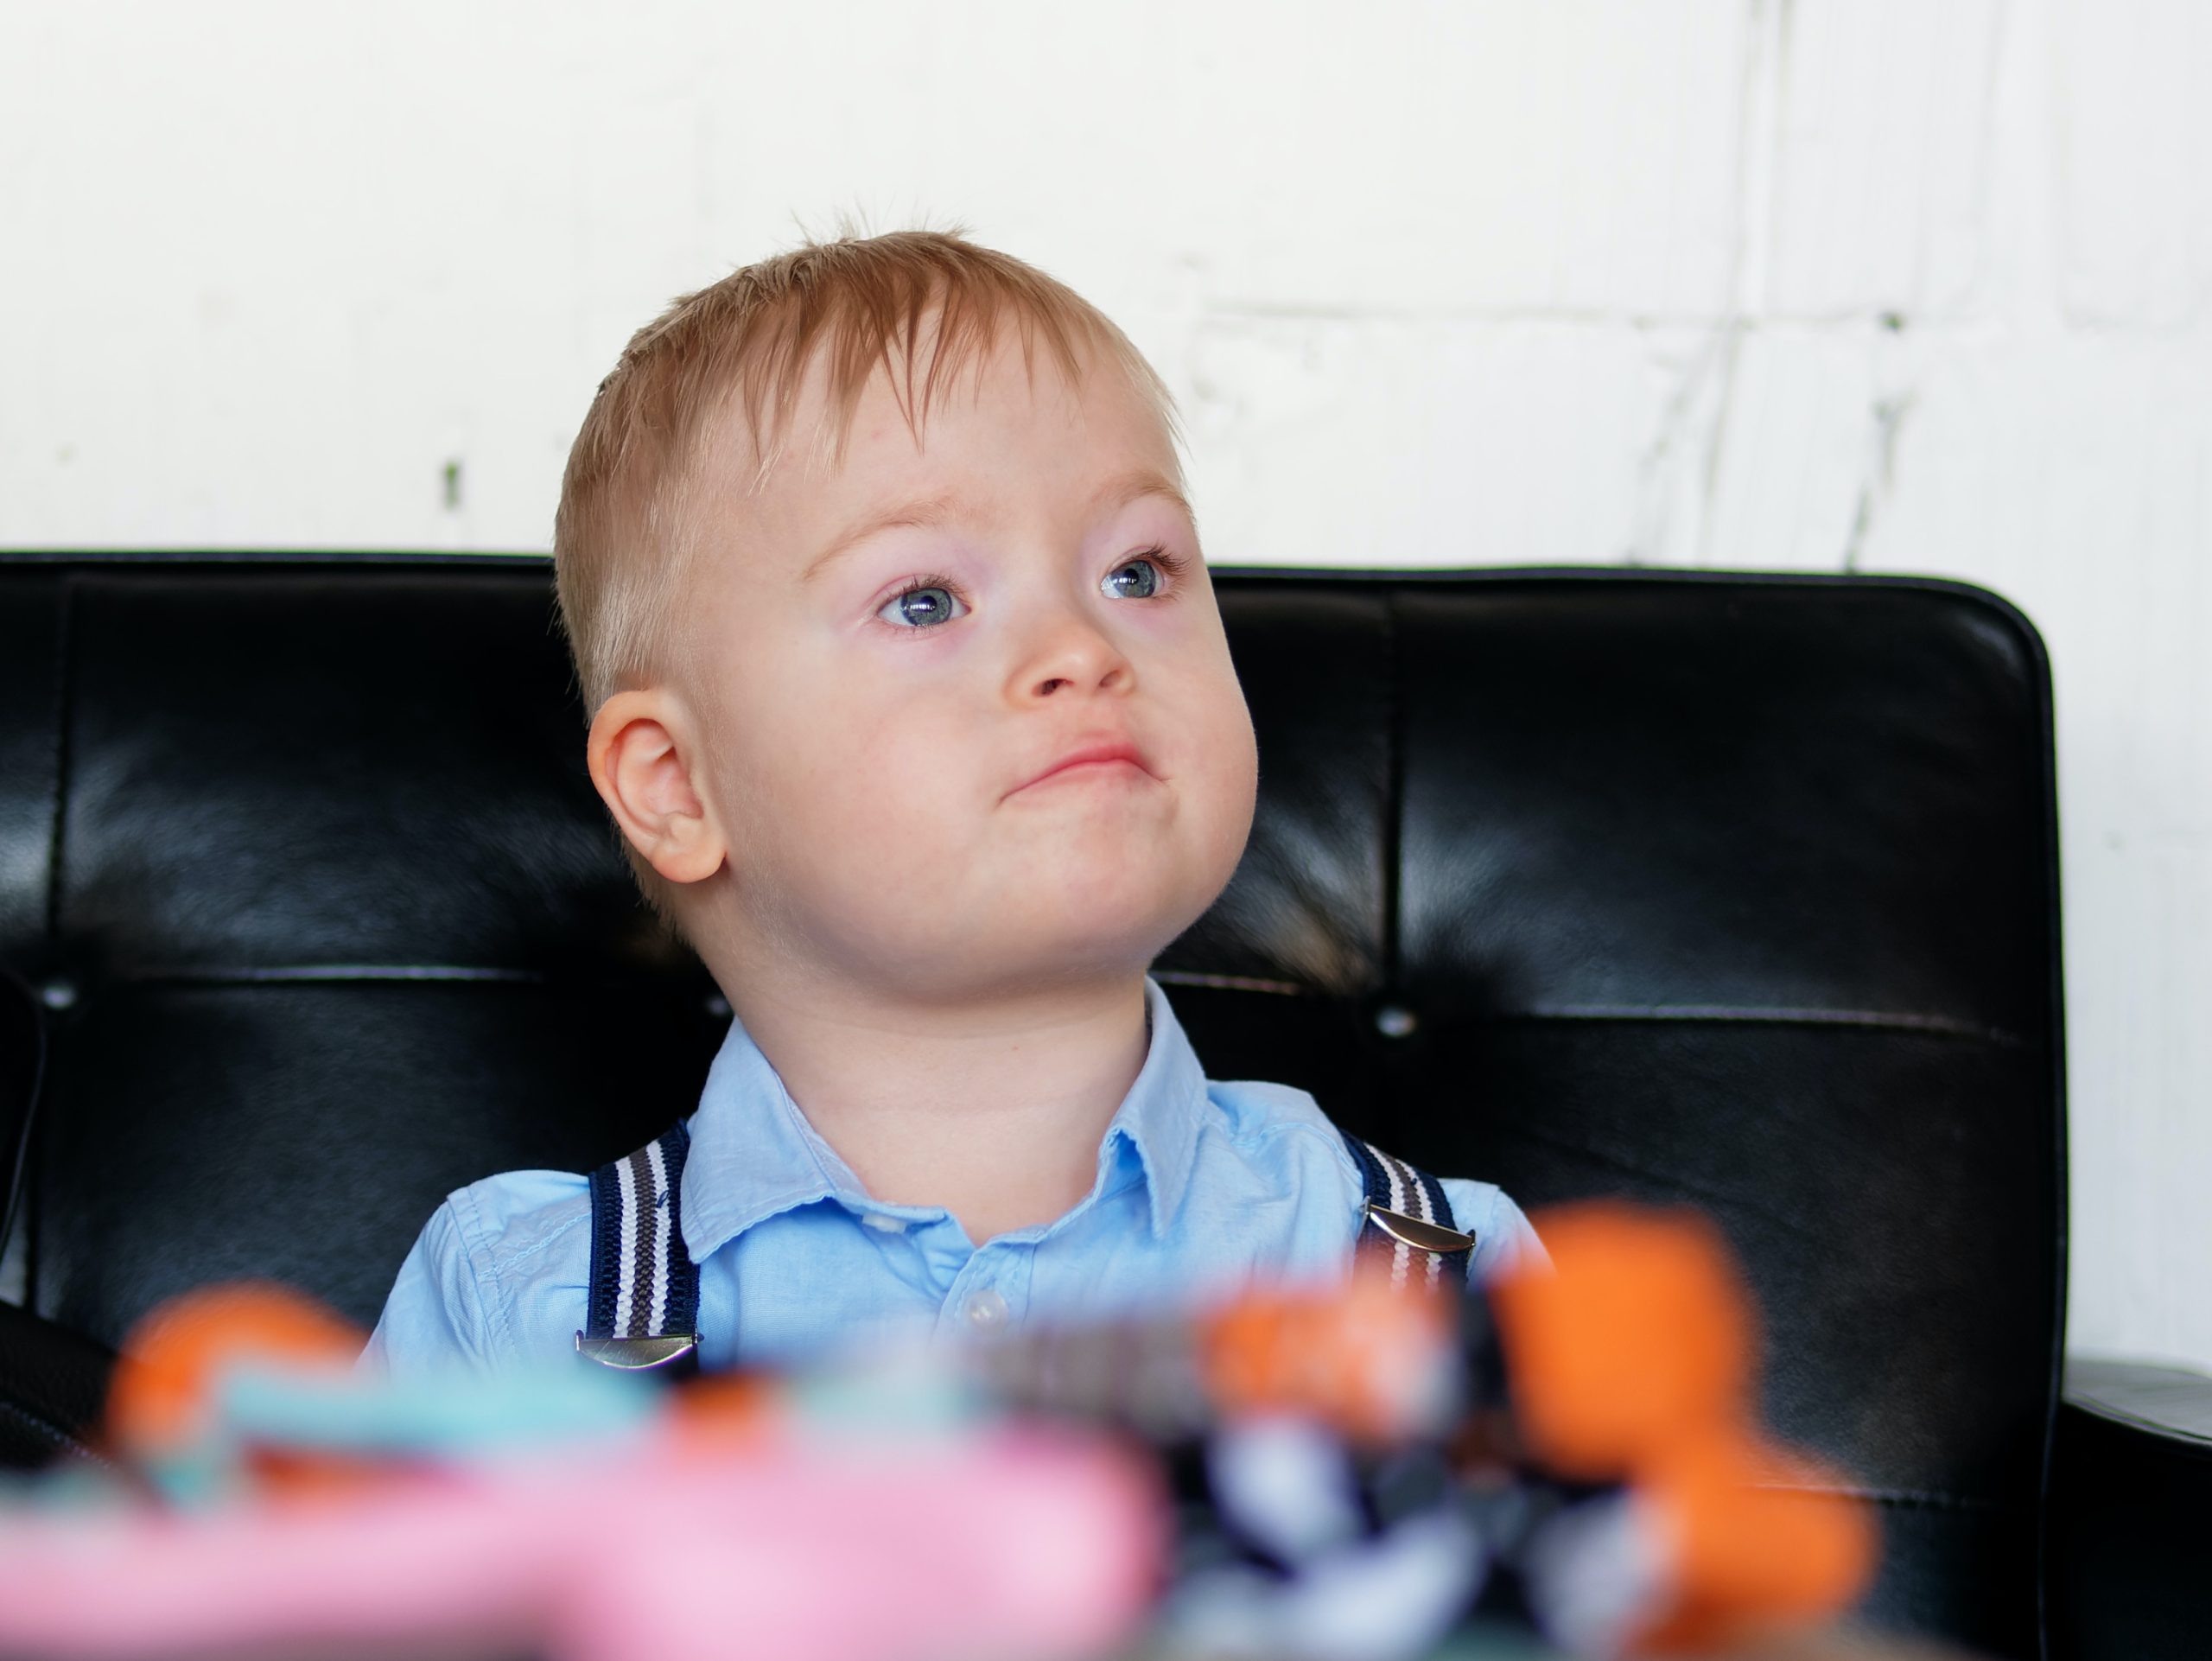 A young boy with Down syndrome sitting in a black chair.